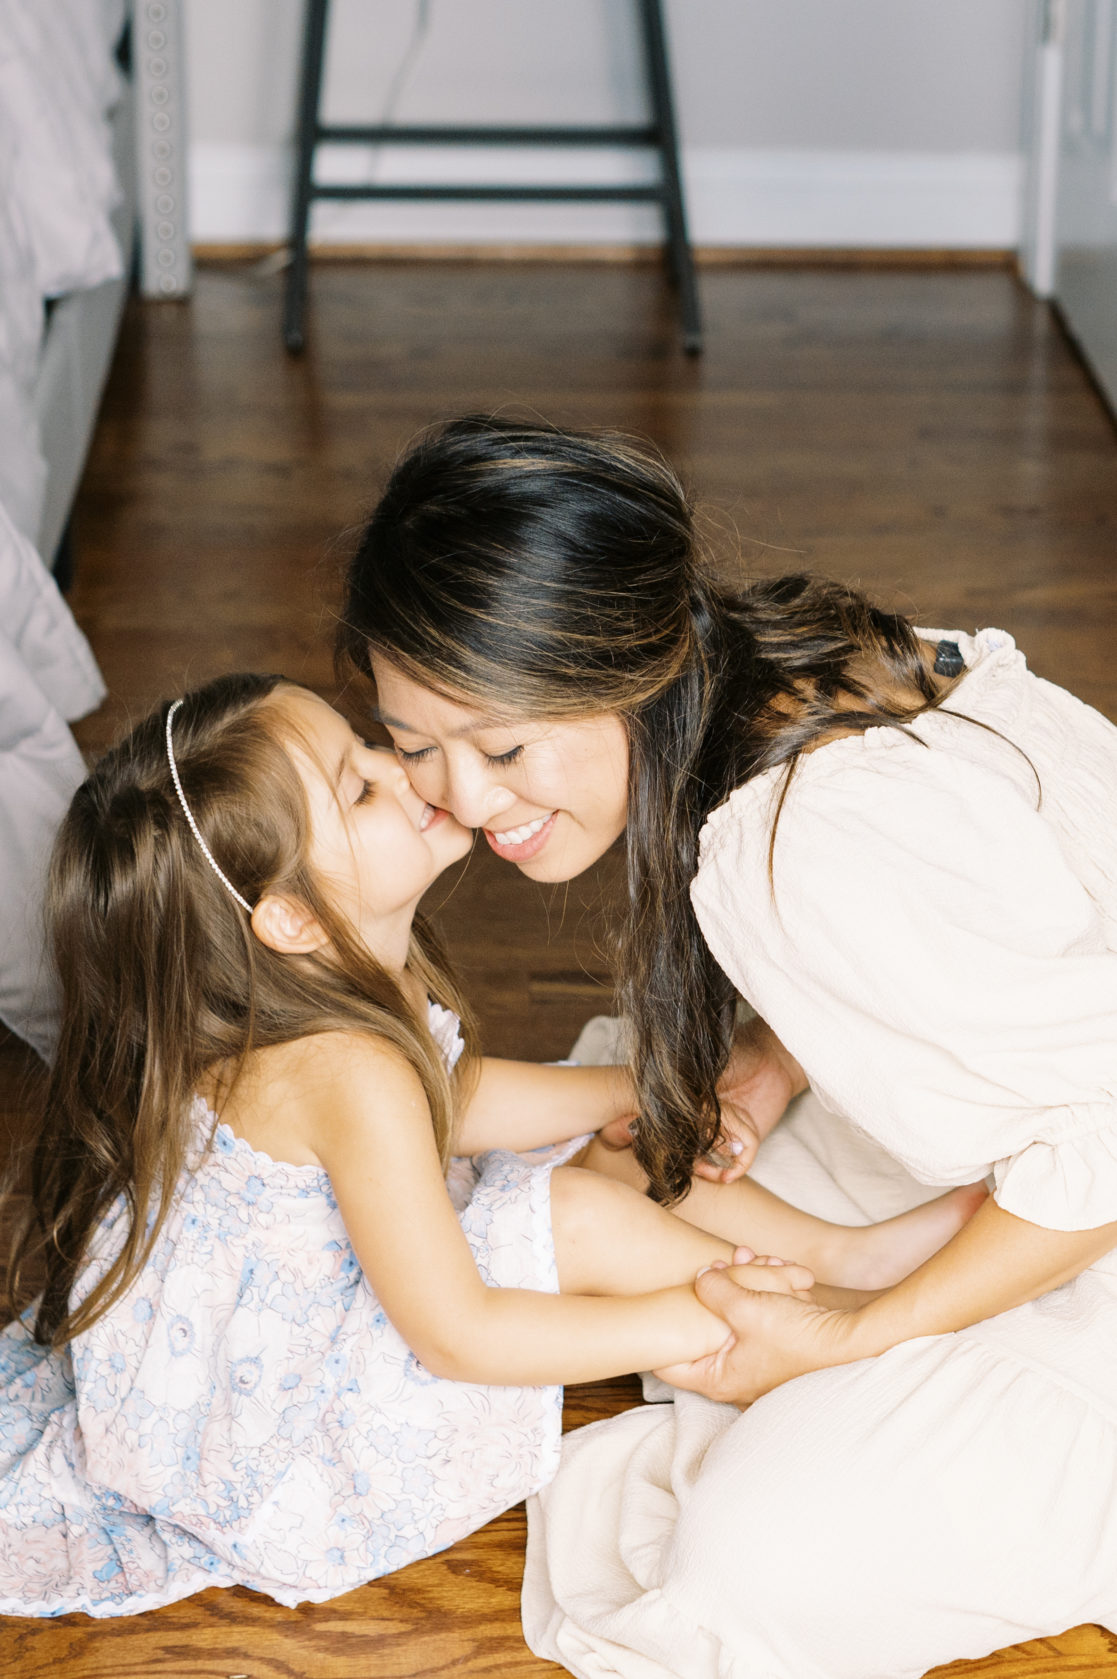 Photo of daughter giving mother a kiss on the cheek by Richmond family photographer Jacqueline Aimee Portraits